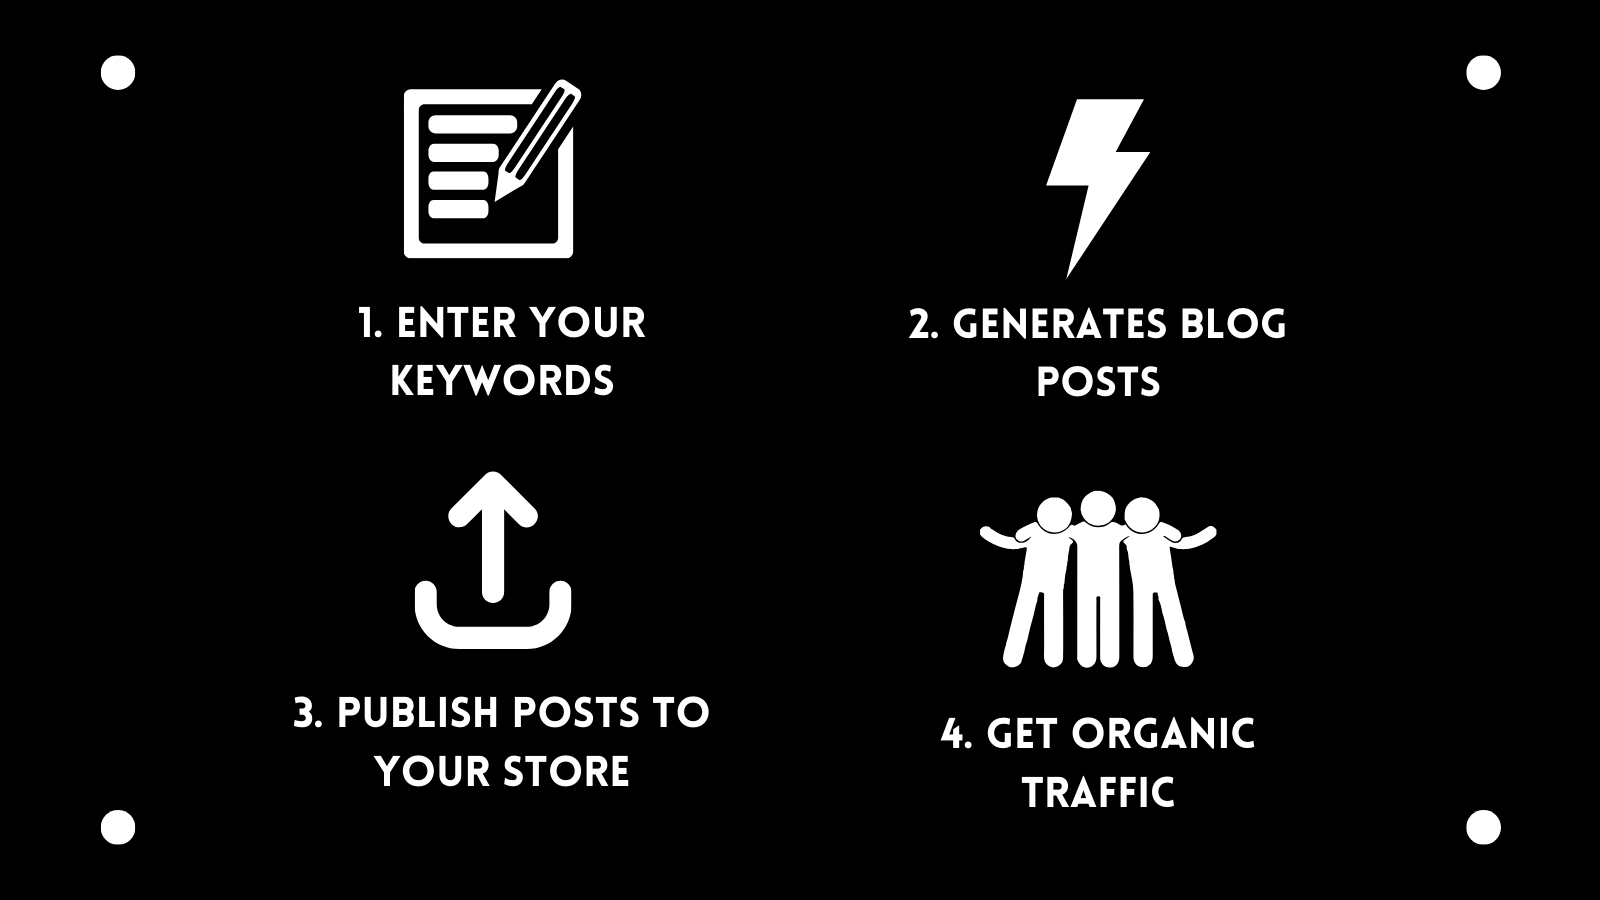 Enter keywords, generate blog posts, publish posts to your store